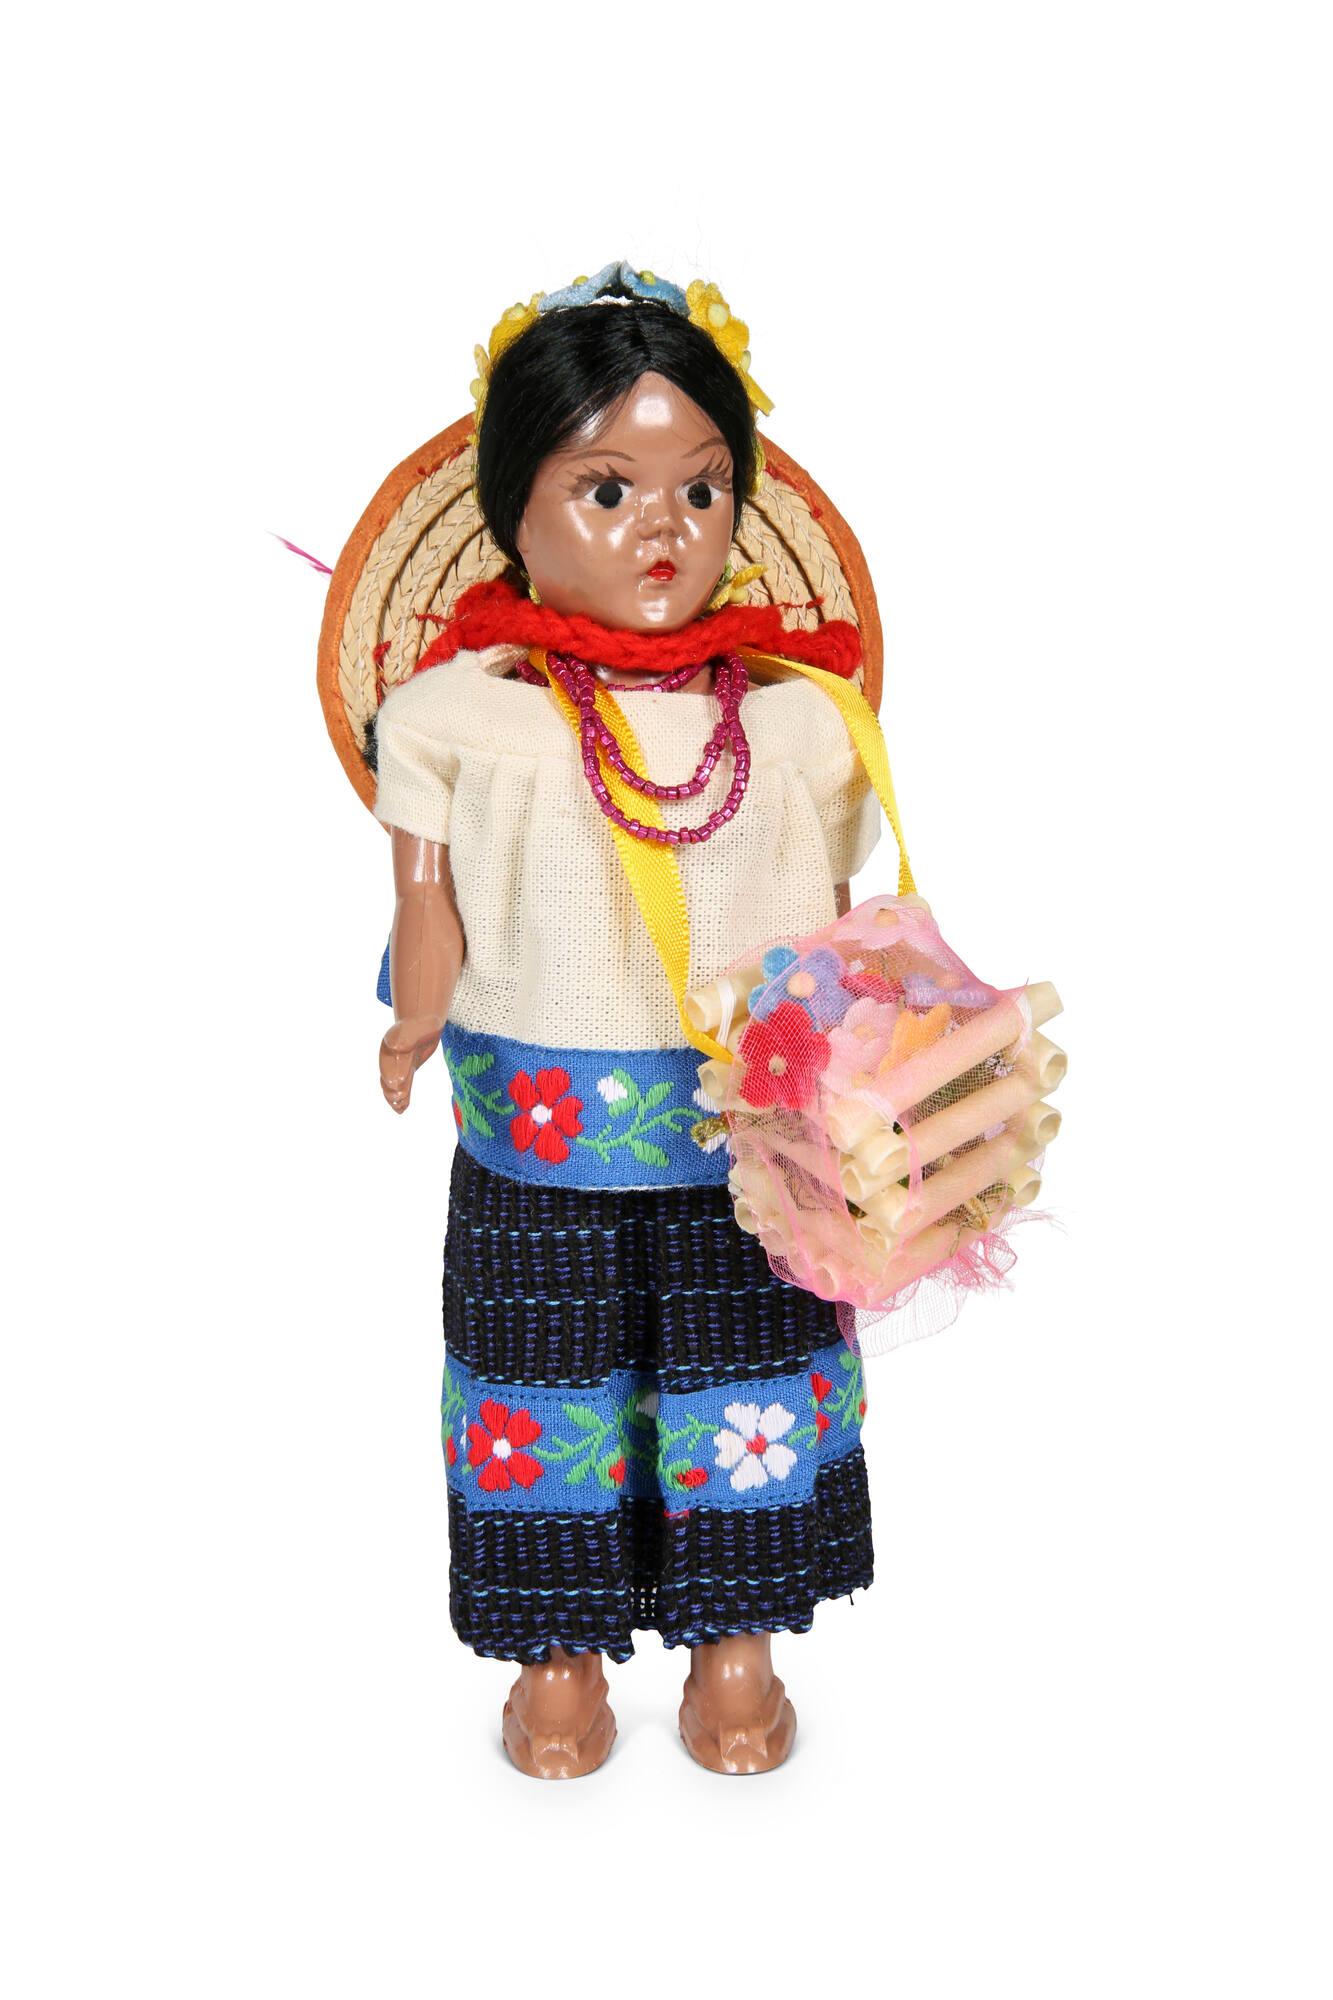 Mexican Girl Doll All Artifacts The John F Kennedy Presidential